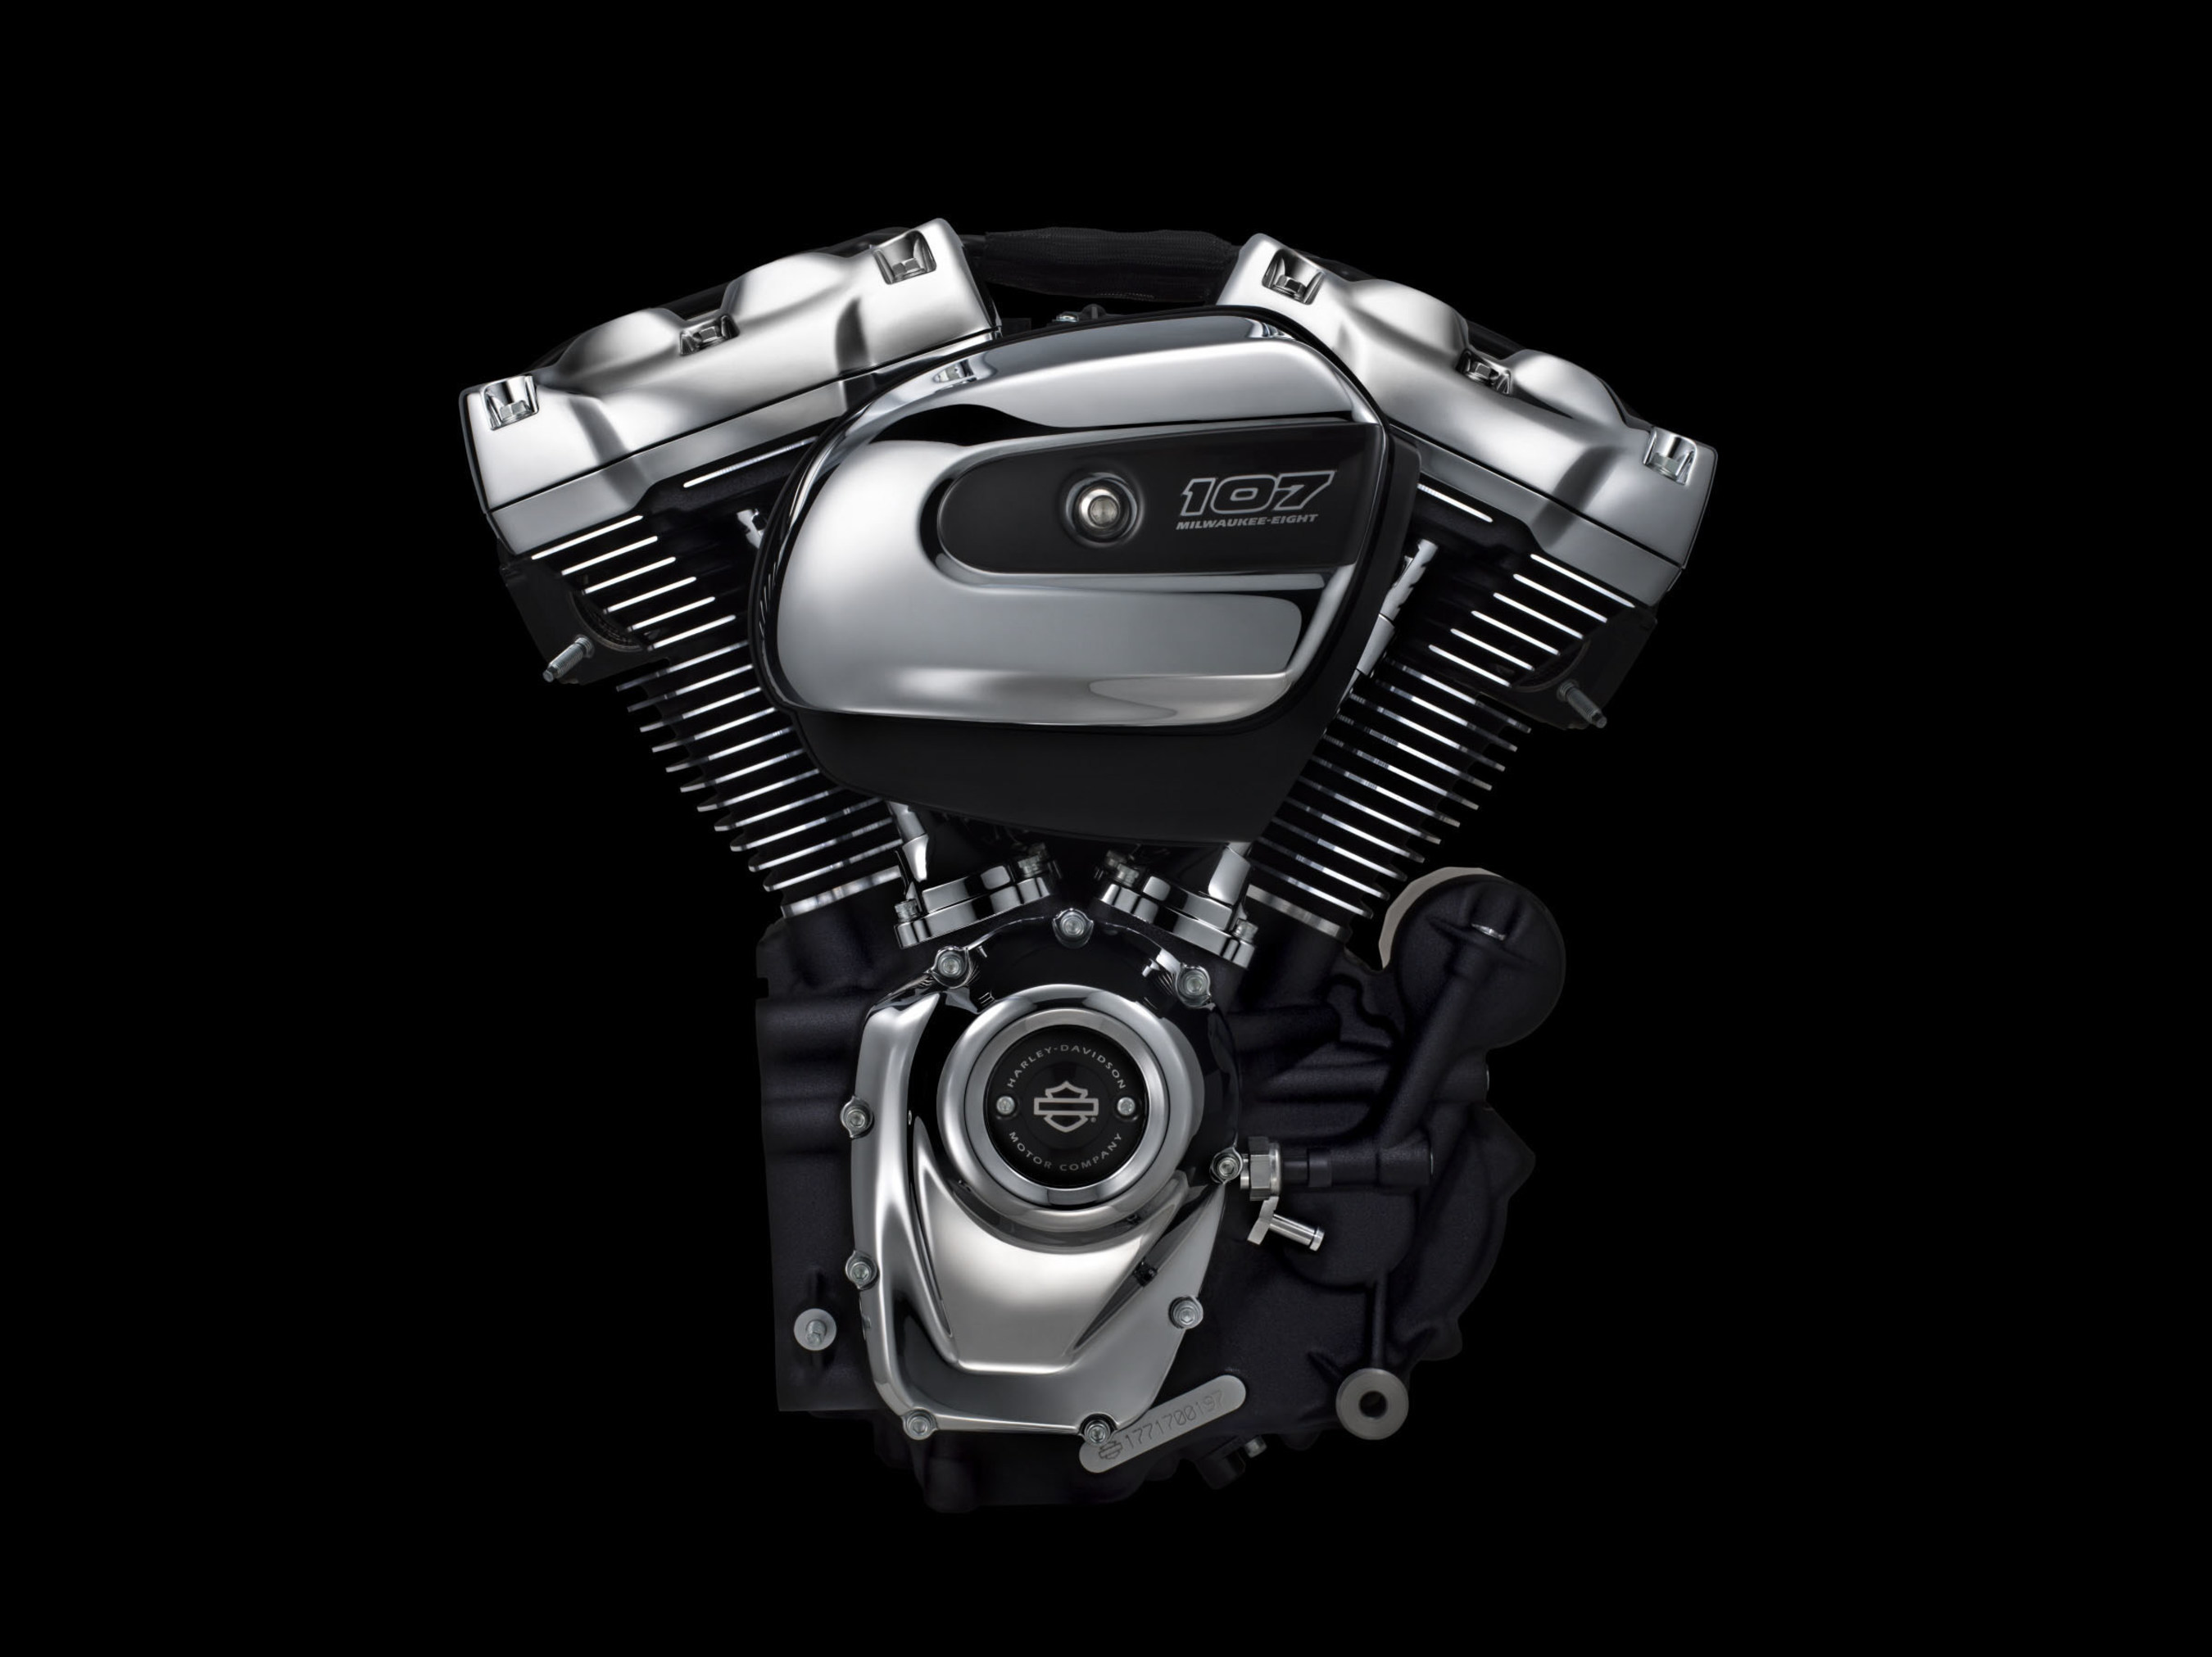 Harley-Davidson's new Milwaukee-Eight engine, the ninth Big Twin in the company's history, delivers more power and an improved riding experience while retaining the iconic look, sound and feel of its predecessors.